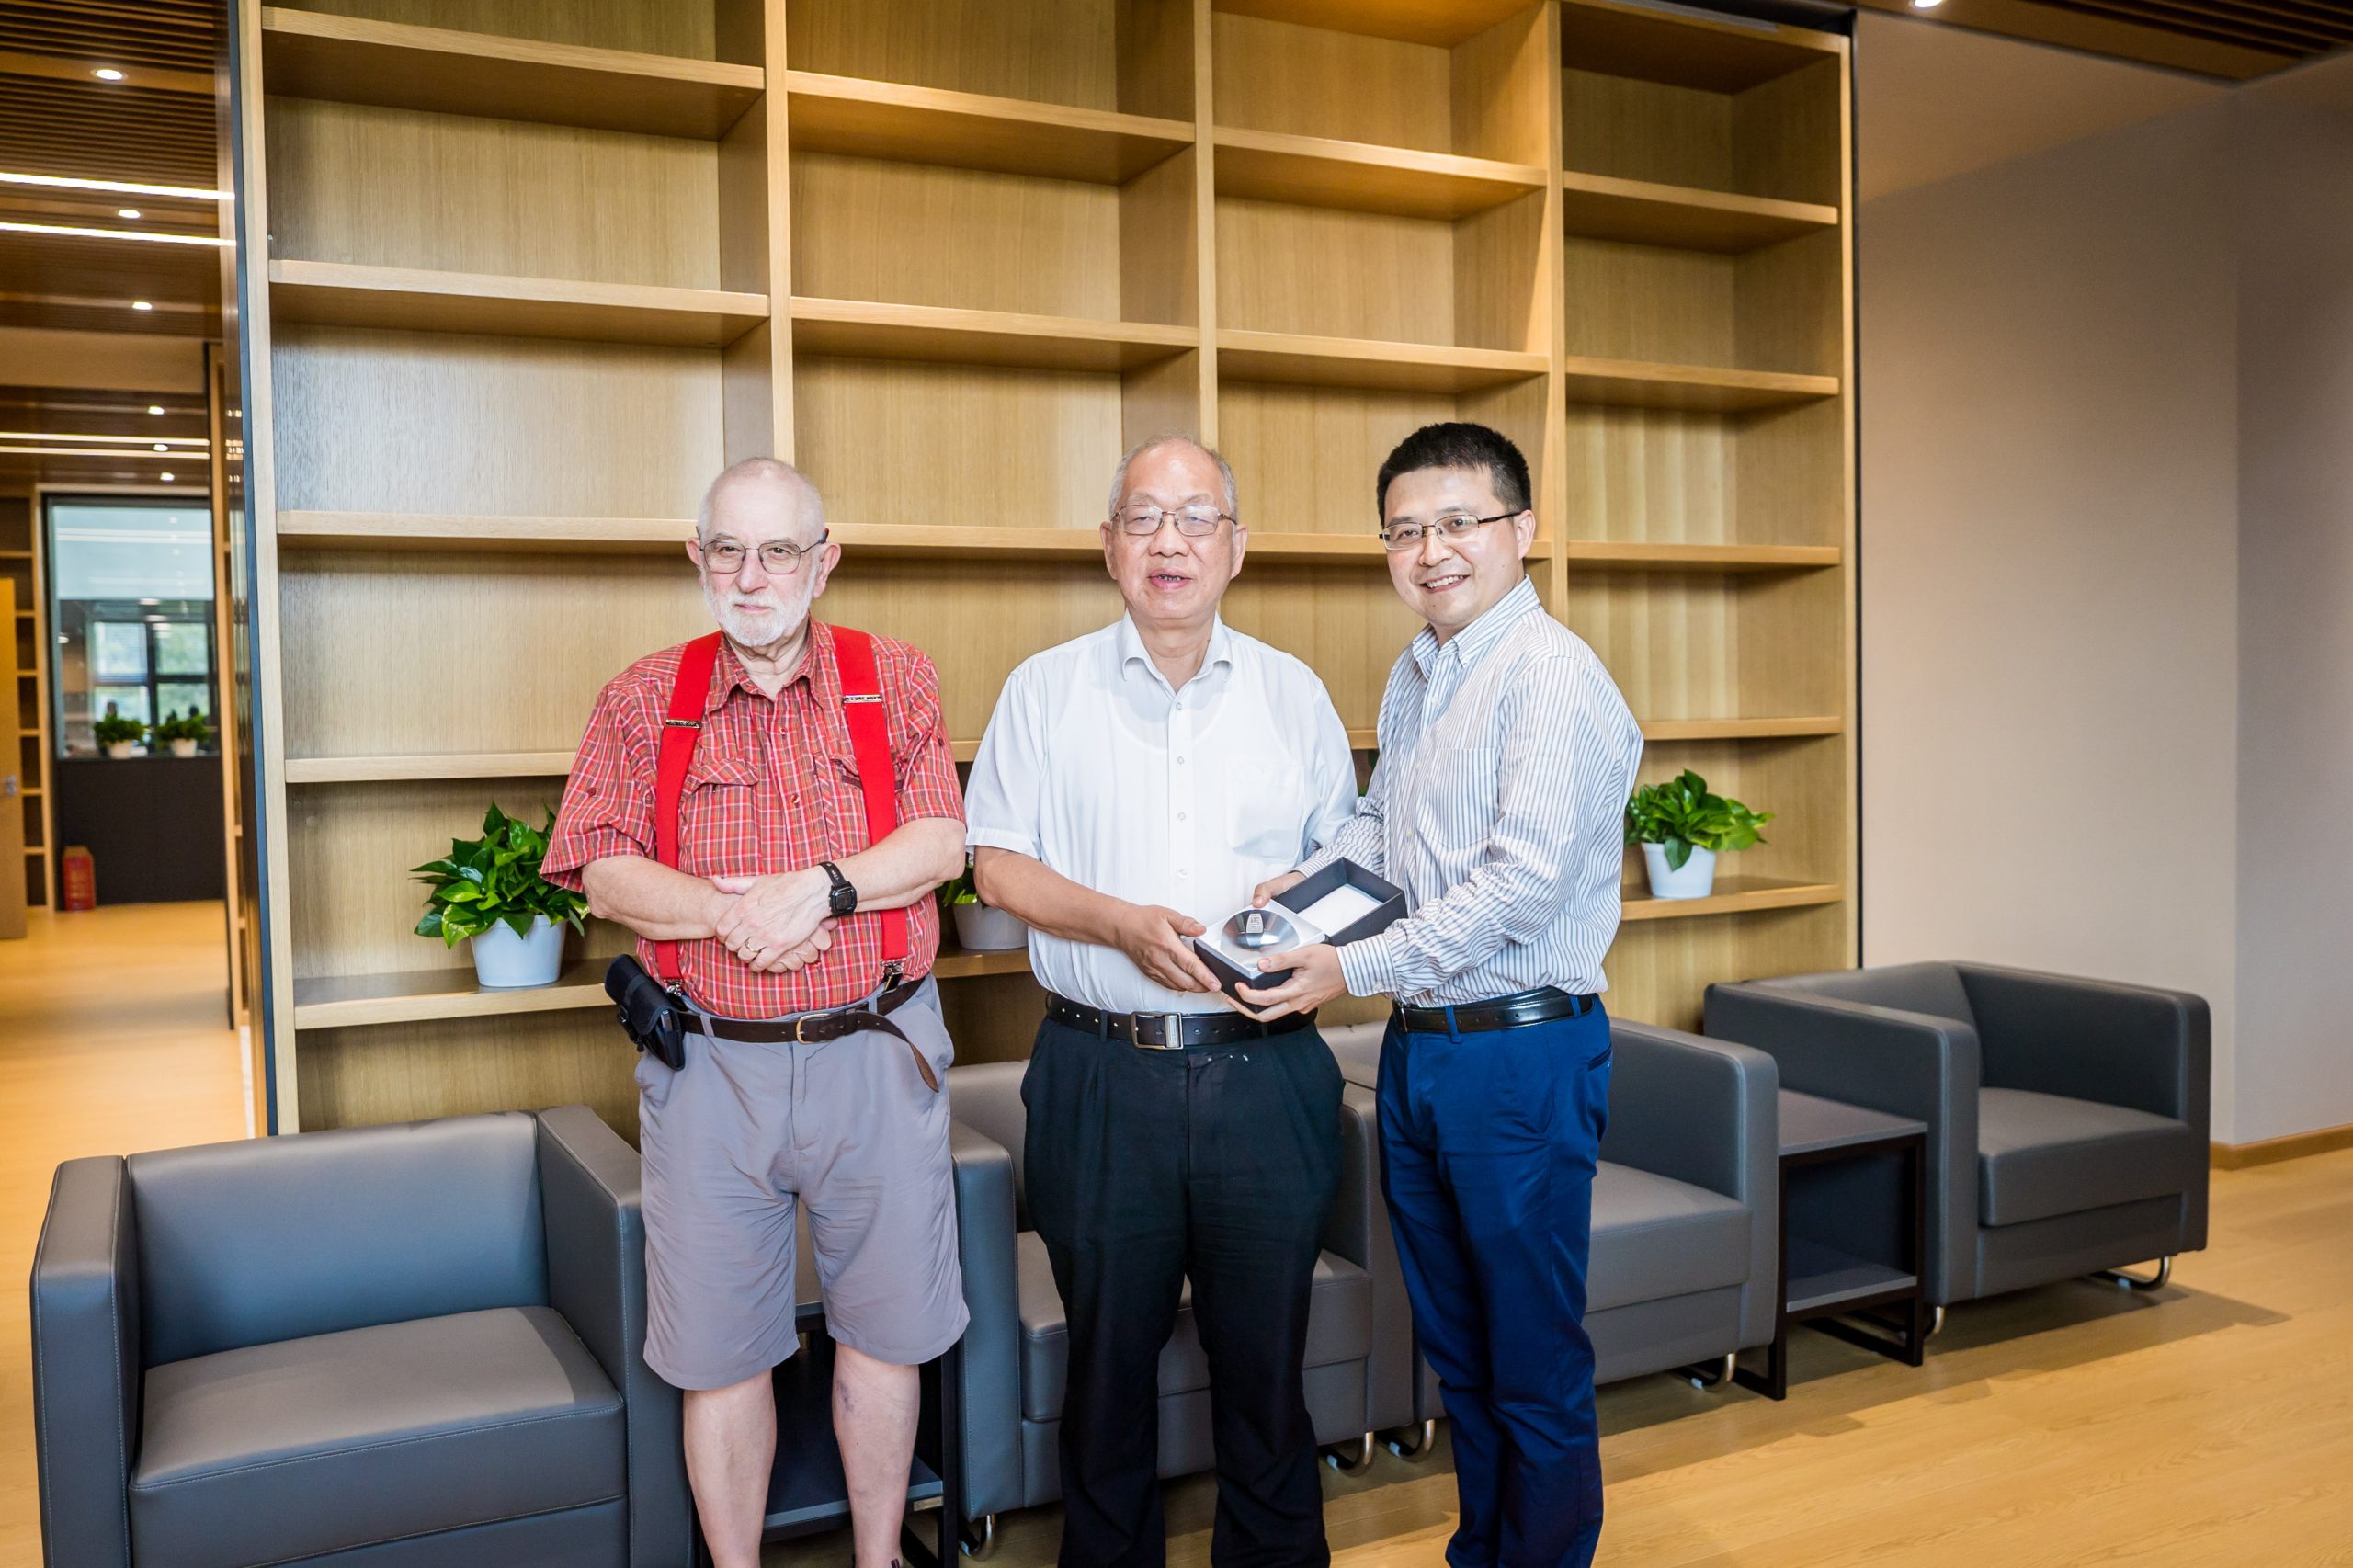 Sir Michael Berry (left), Shing-Tung Yau (center) and Wei Liu (right) with Gömböc 2023  in Beijing in 2023 at the Beijing Insitute of Mathematical Sceinces and Applications (BIMSA).